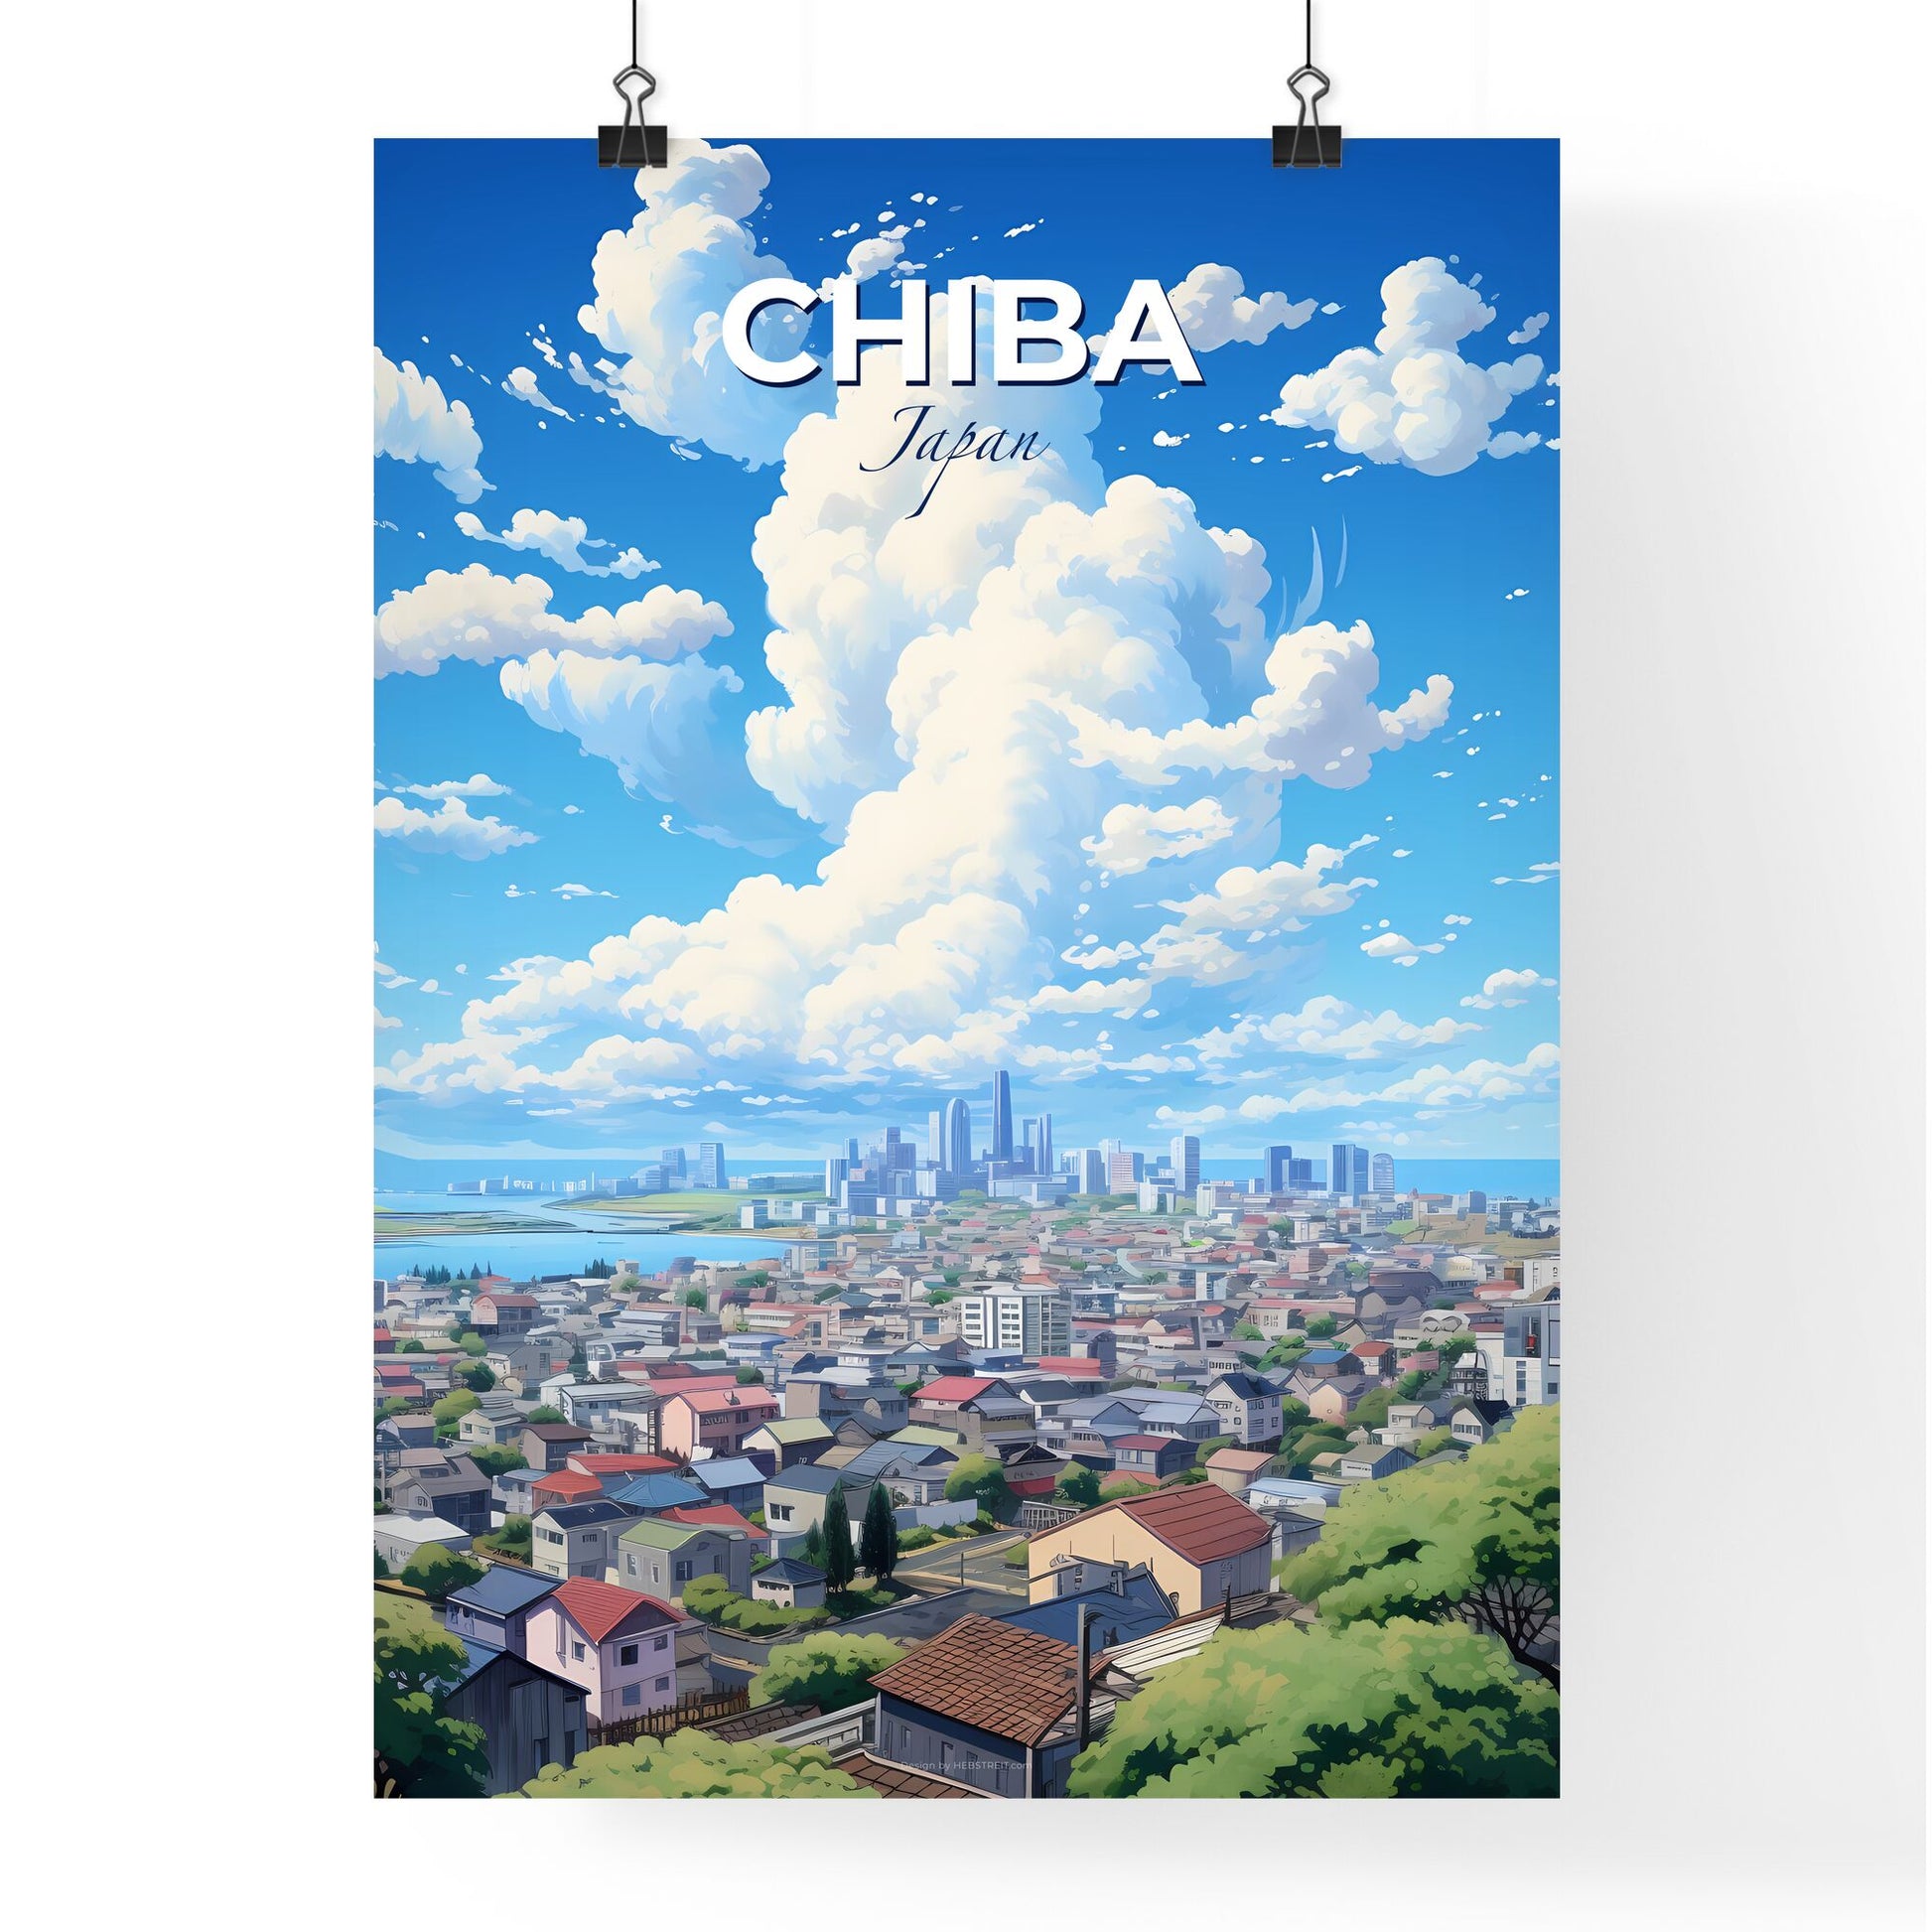 Chiba Japan Skyline - A City With Buildings And Trees And A Body Of Water - Customizable Travel Gift Default Title